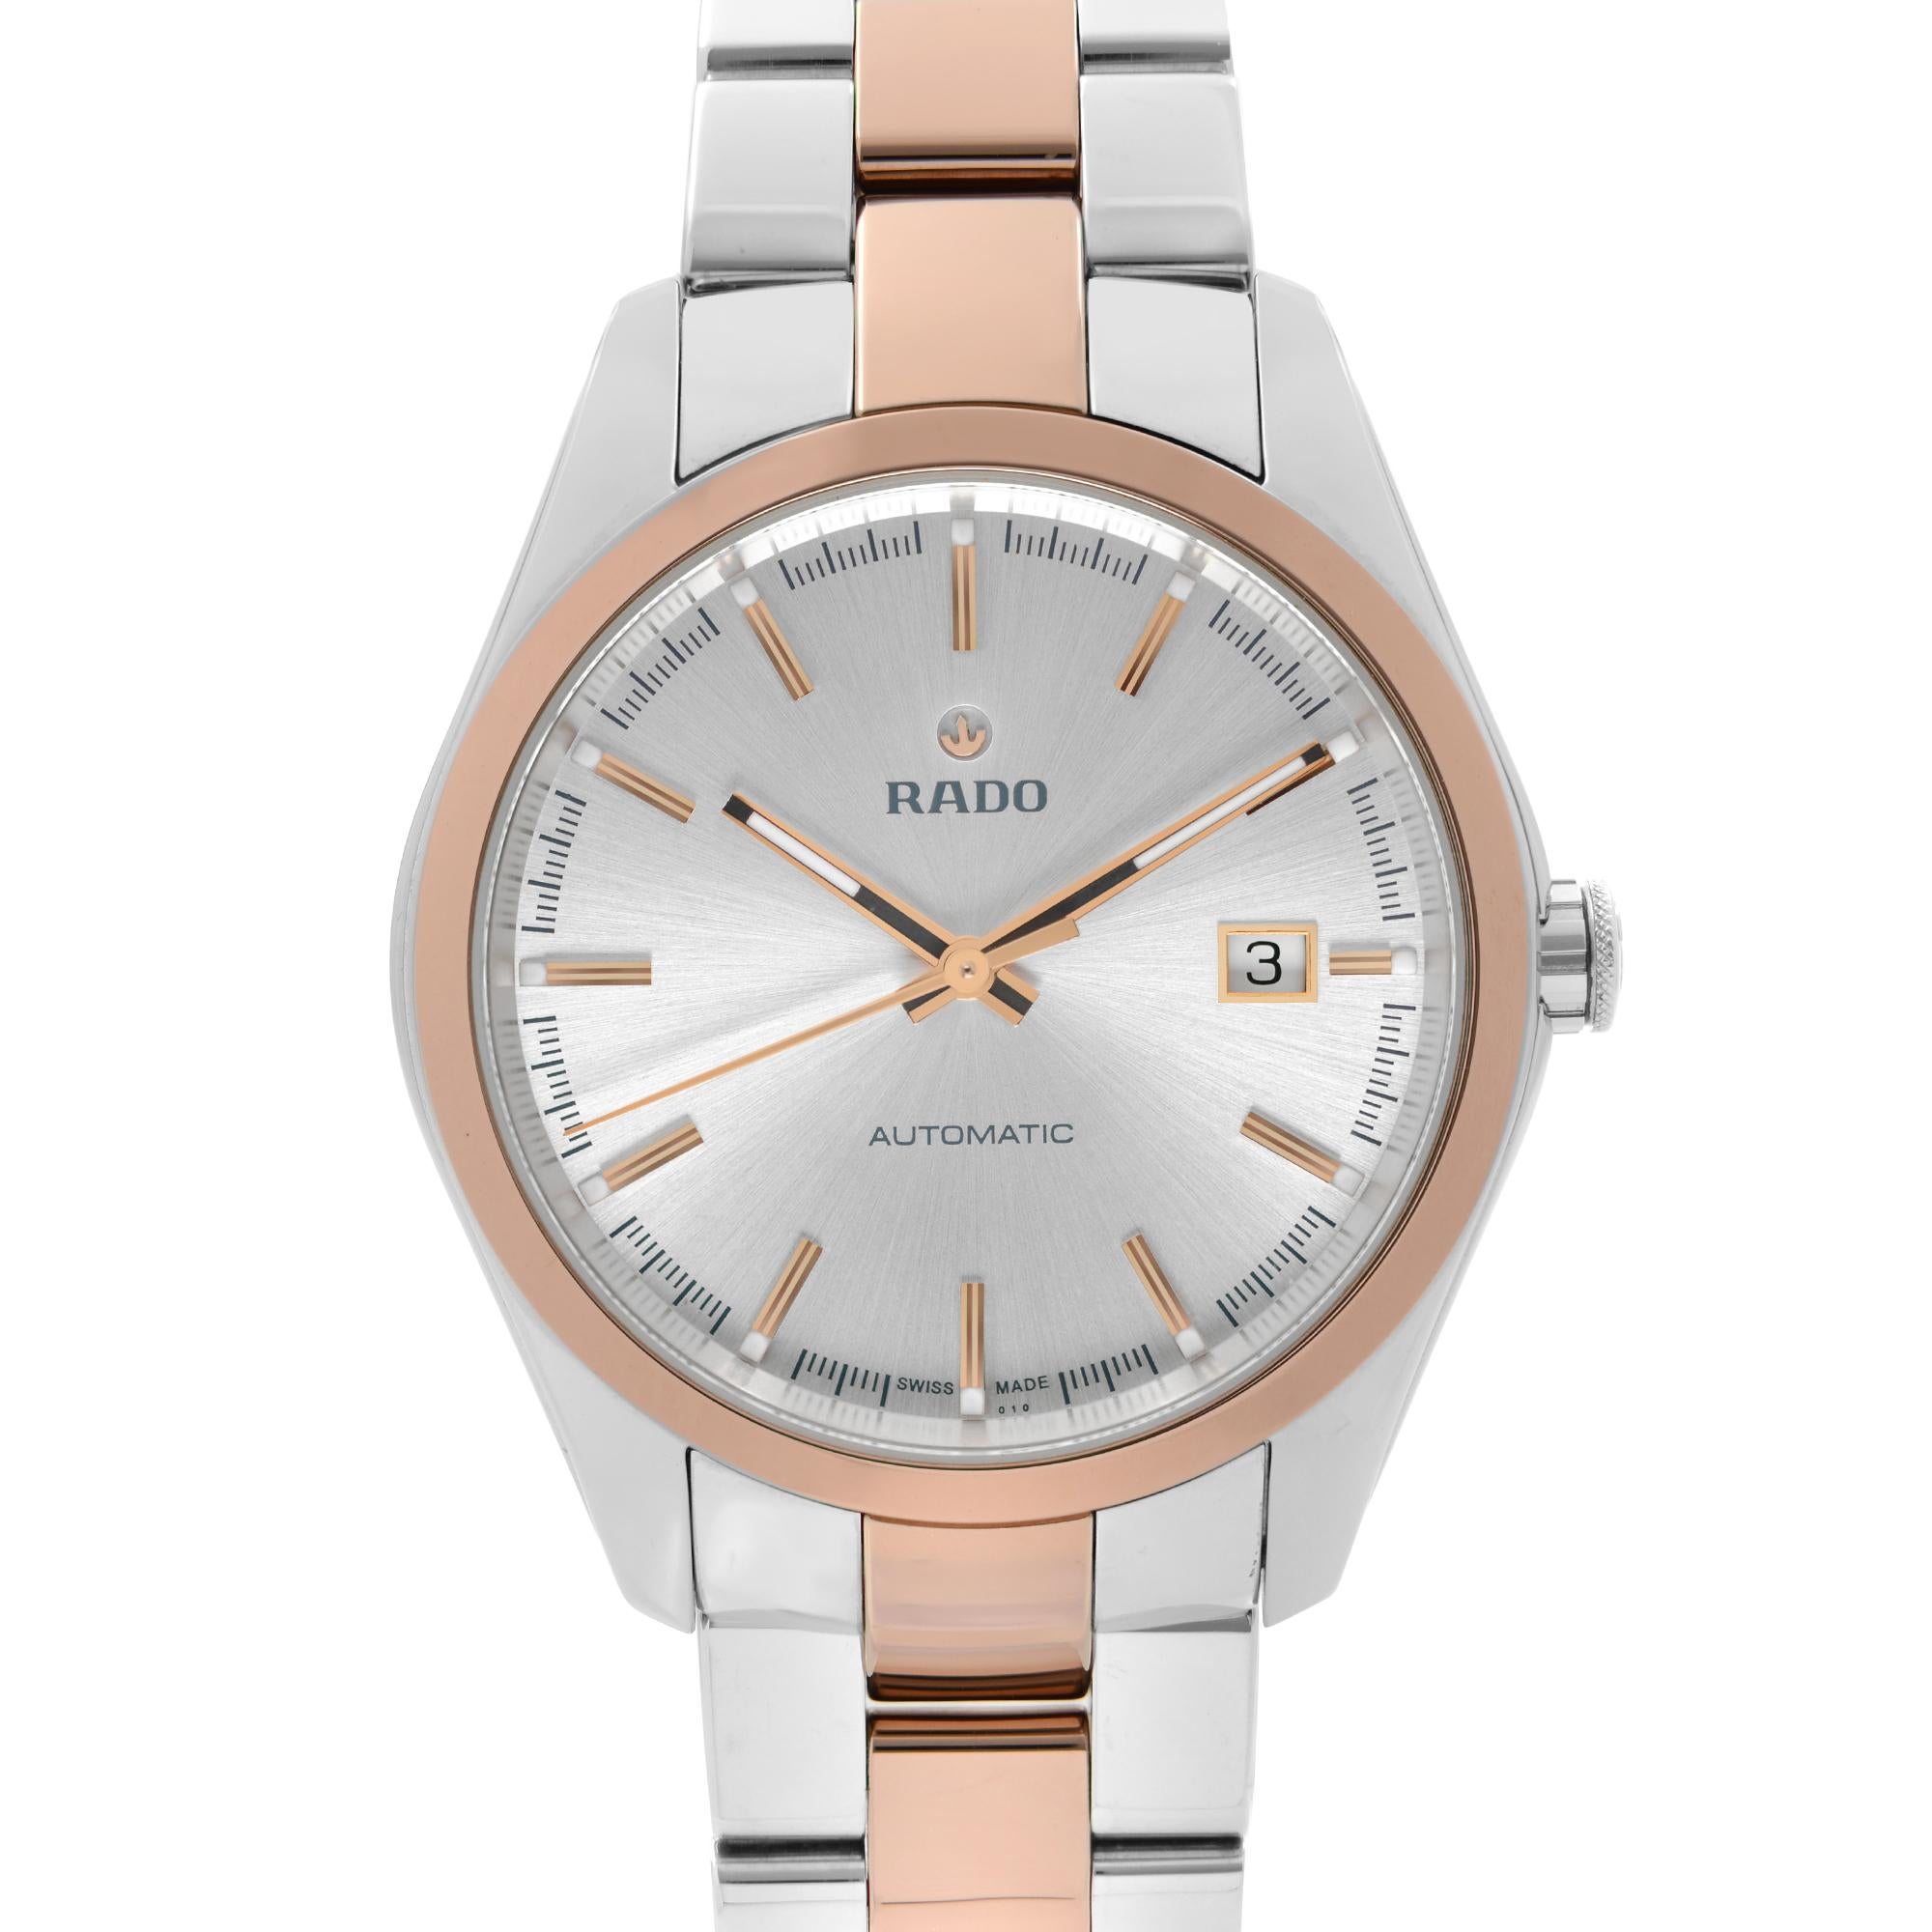 Display Model Rado Hyperchrome 40mm Stainless Steel Ceramic Silver Dial Automatic Mens Watch R32980102. This Beautiful Timepiece Features: Stainless Steel Case with a Two-Tone Ceramic and Stainless Steel Bracelet. Fixed Steel Bezel. Silver Dial with